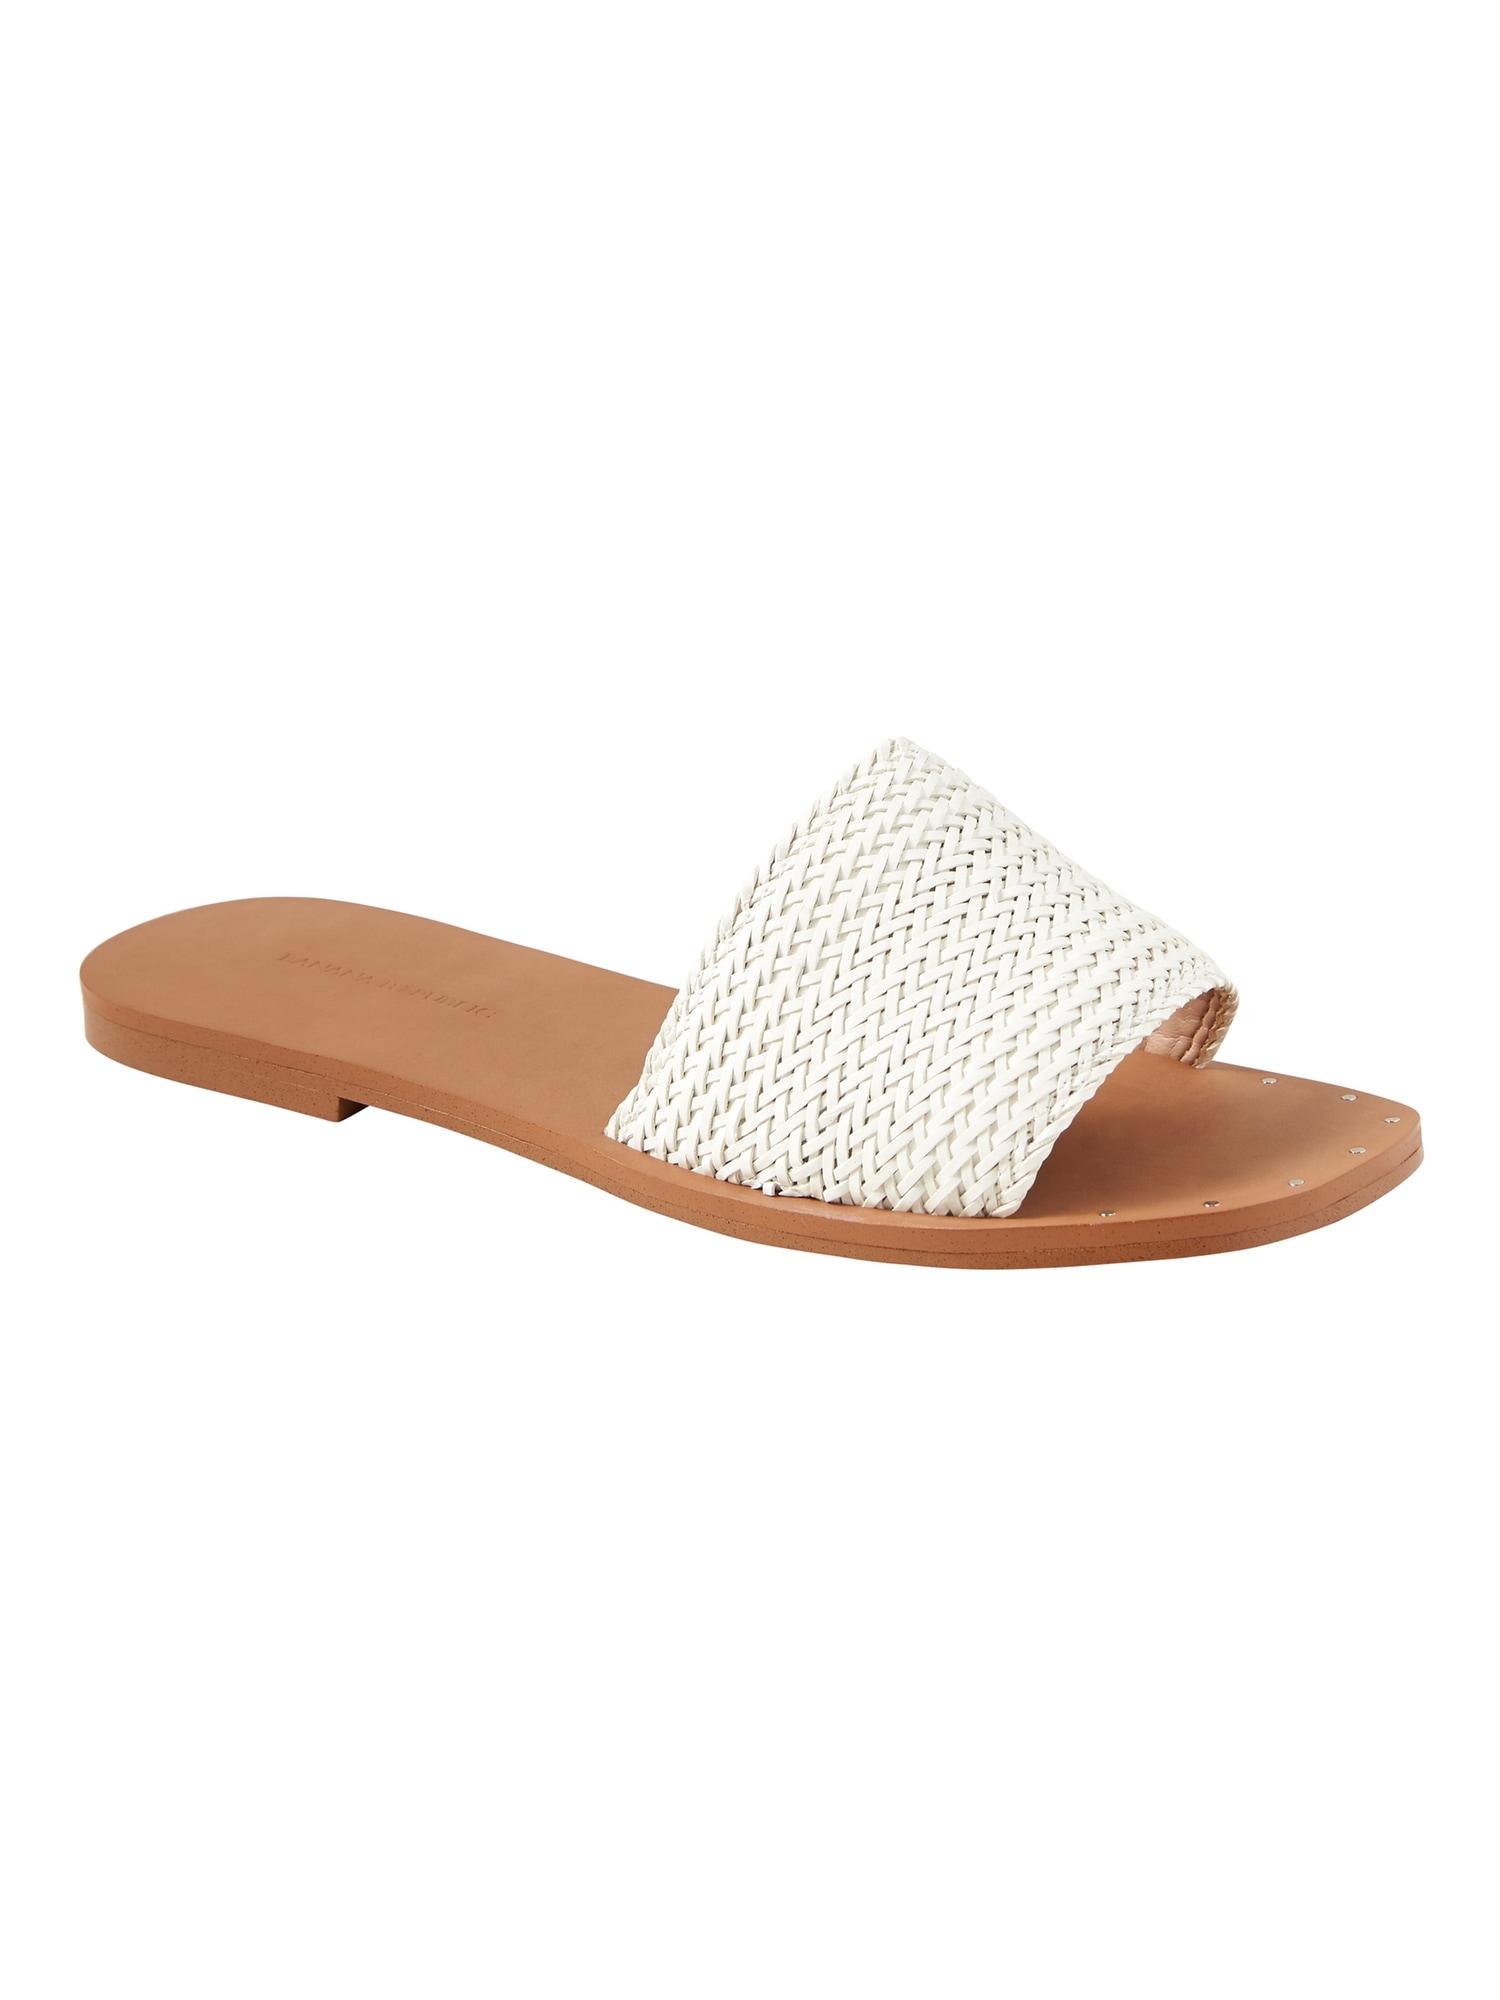 Banana Republic Leather Woven Slide Sandals in White - Lyst